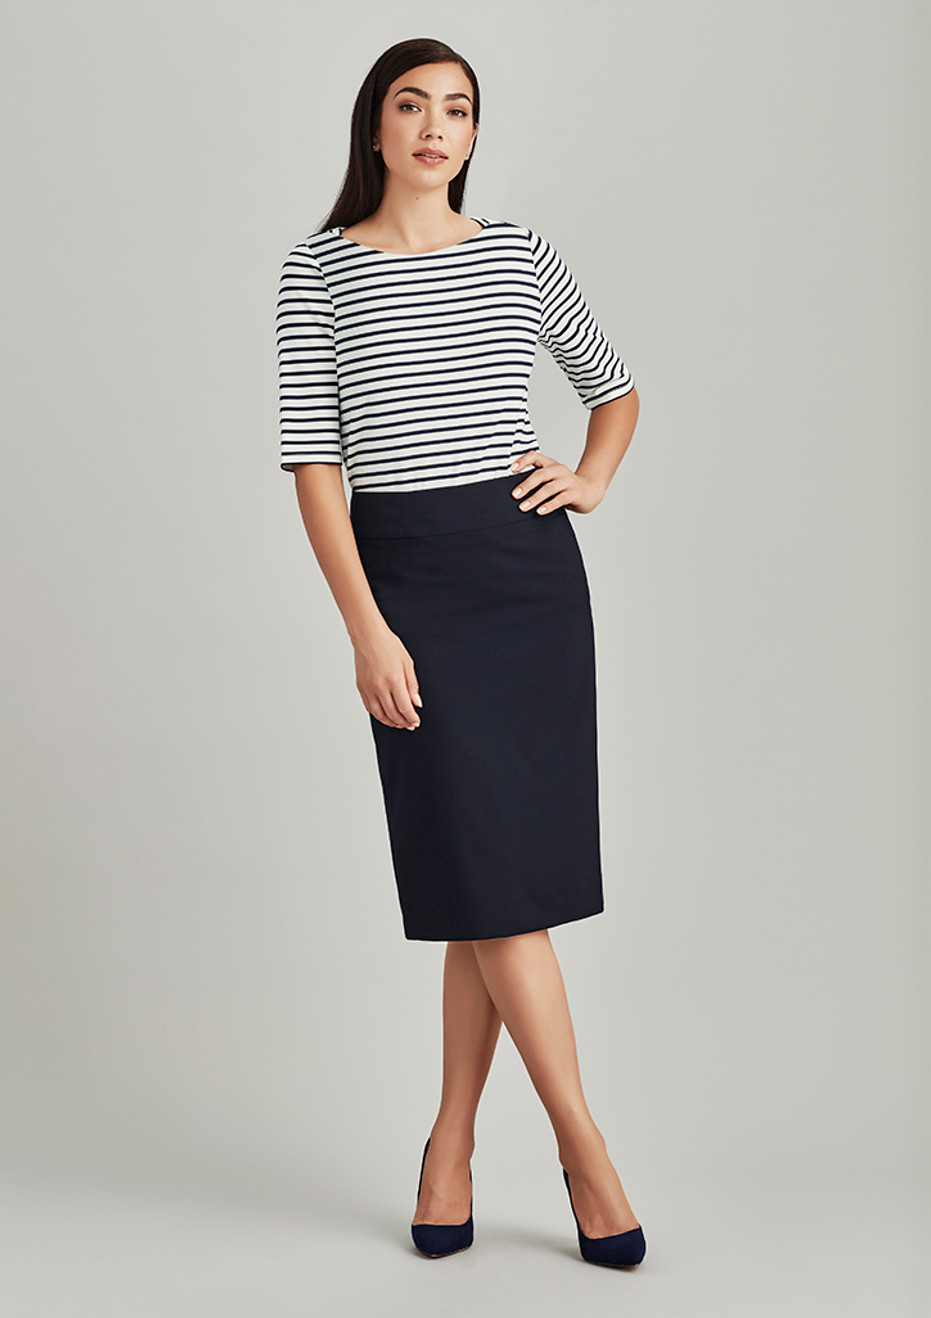 Biz Corporates 24011 Womens Relaxed Fit Skirt | Available Colours: Navy, Black, Charcoal